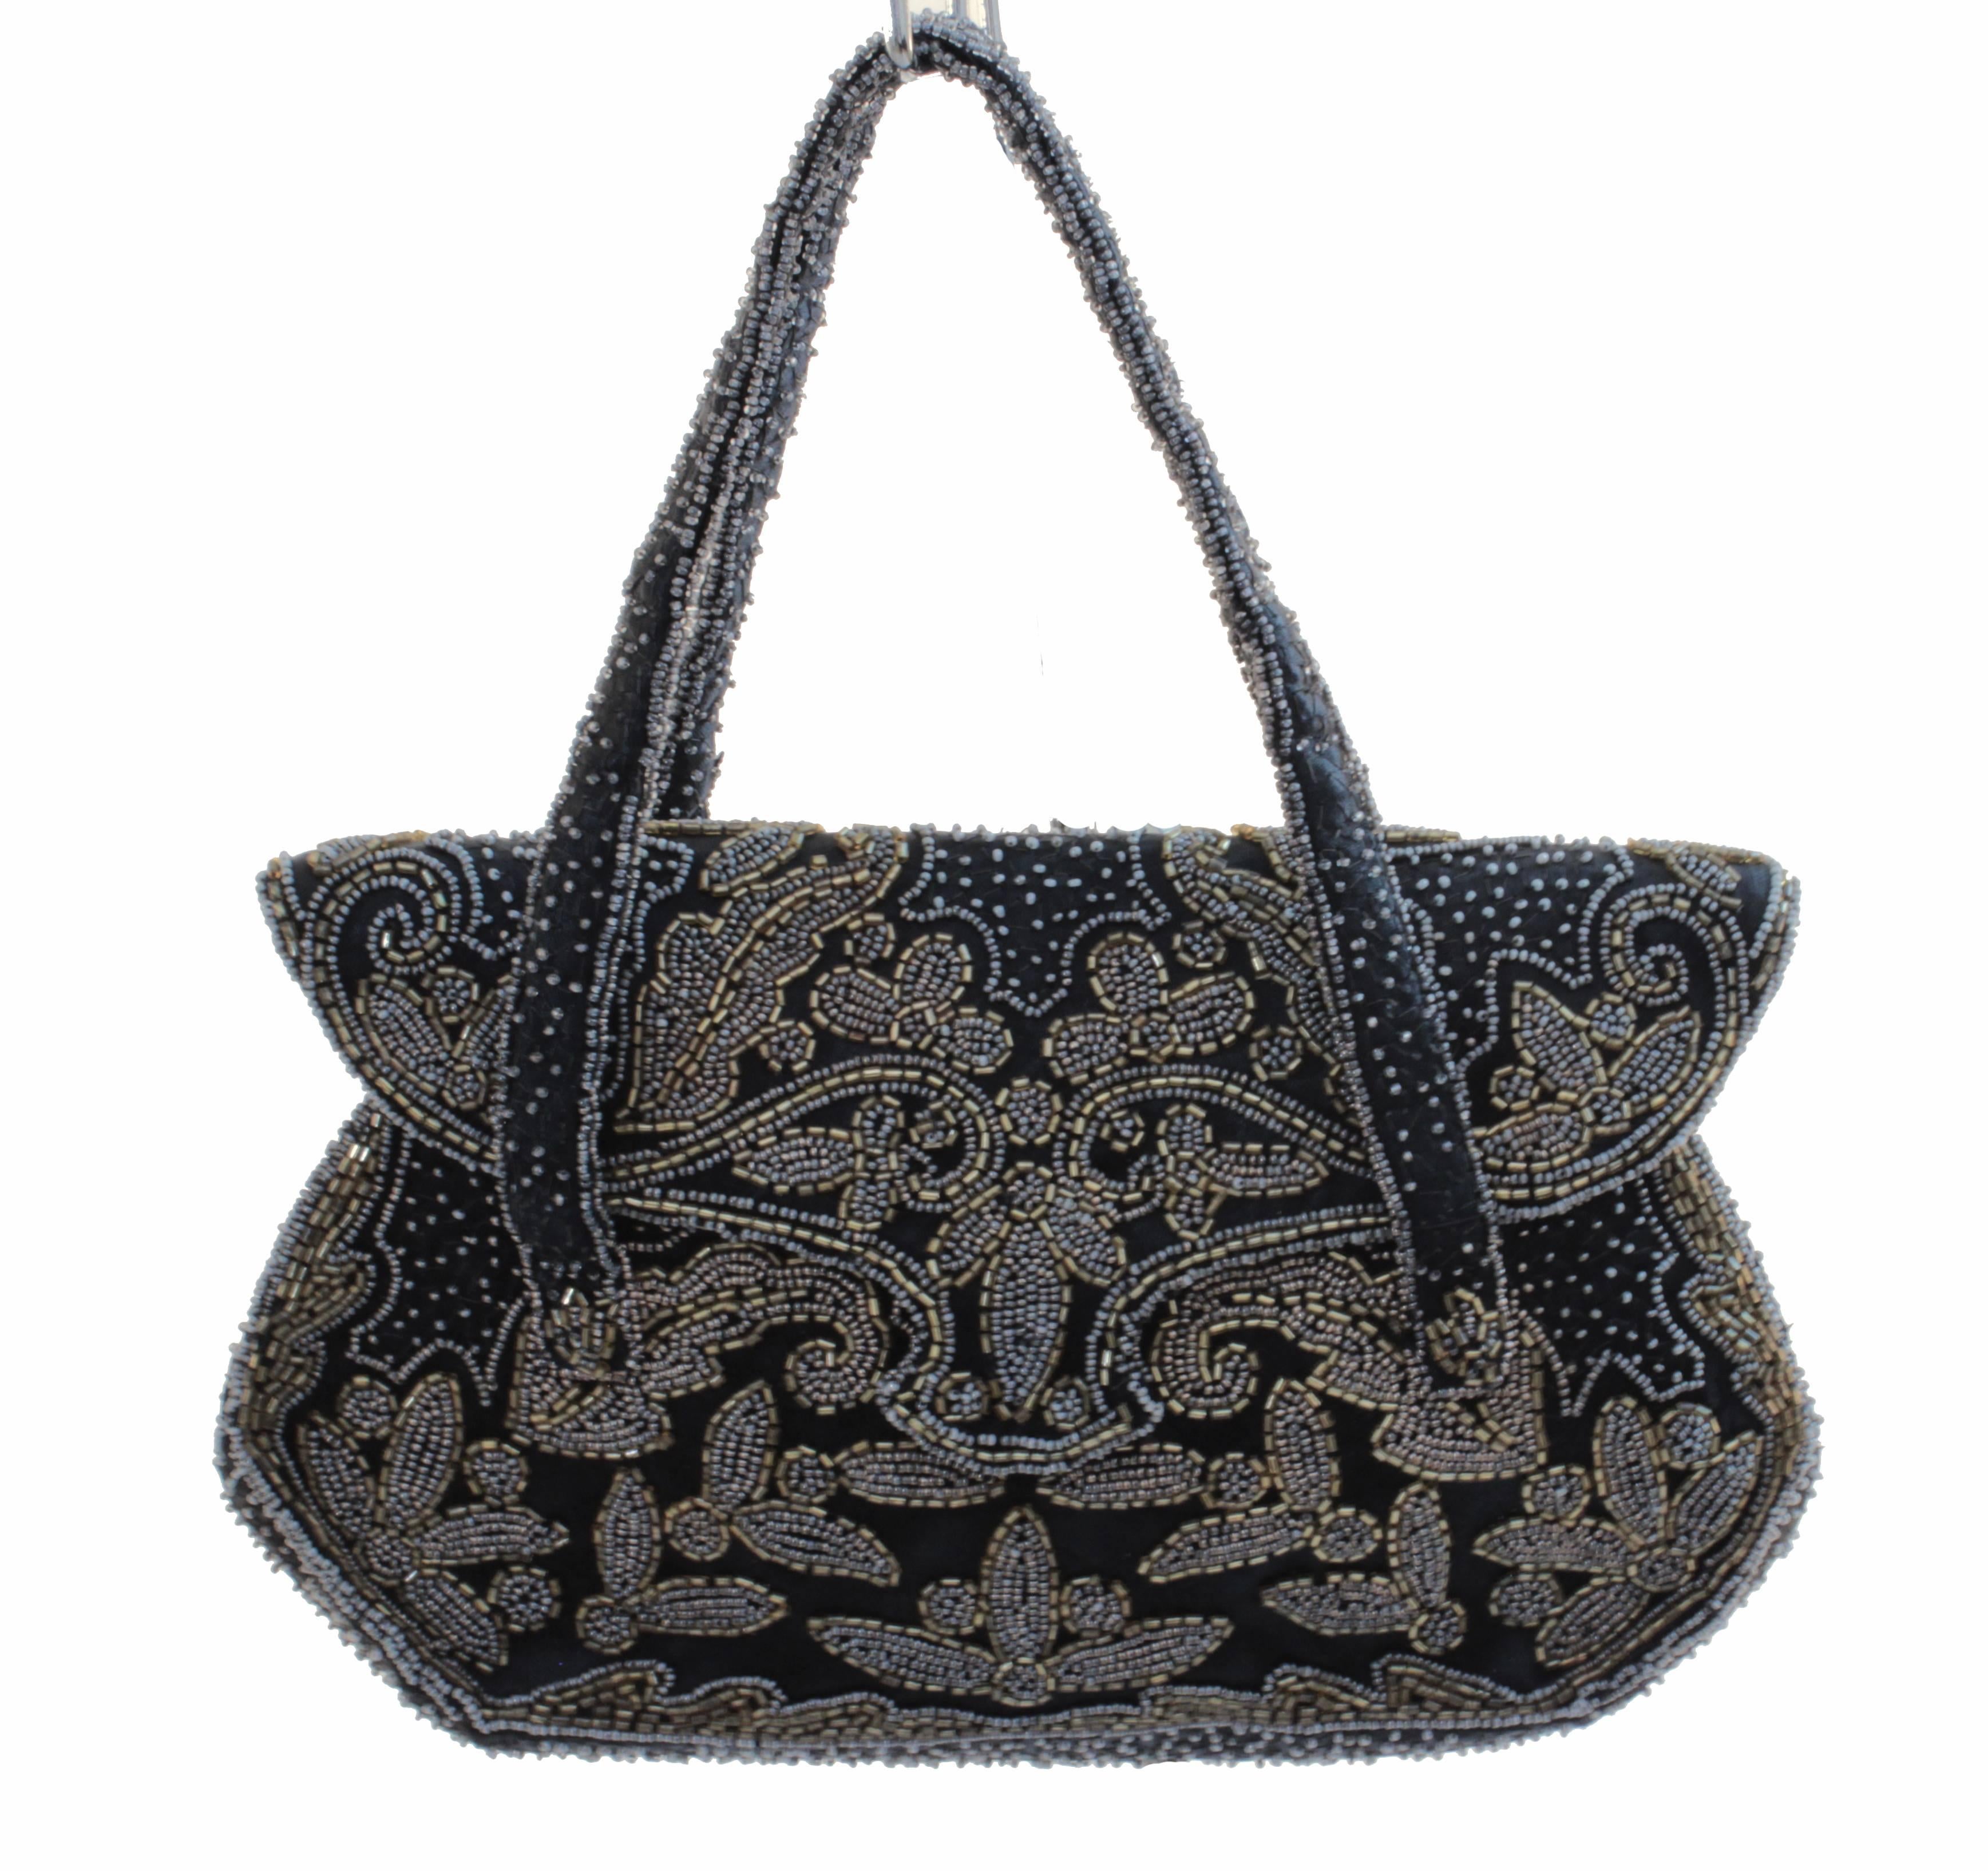 This pretty little evening bag was made in France for Saks Fifth Avenue, most likely in the late 1940s.  Made from black silk, it features gold bugle and tiny white pearl beads throughout.  It's fully-lined in black silk and features one flat